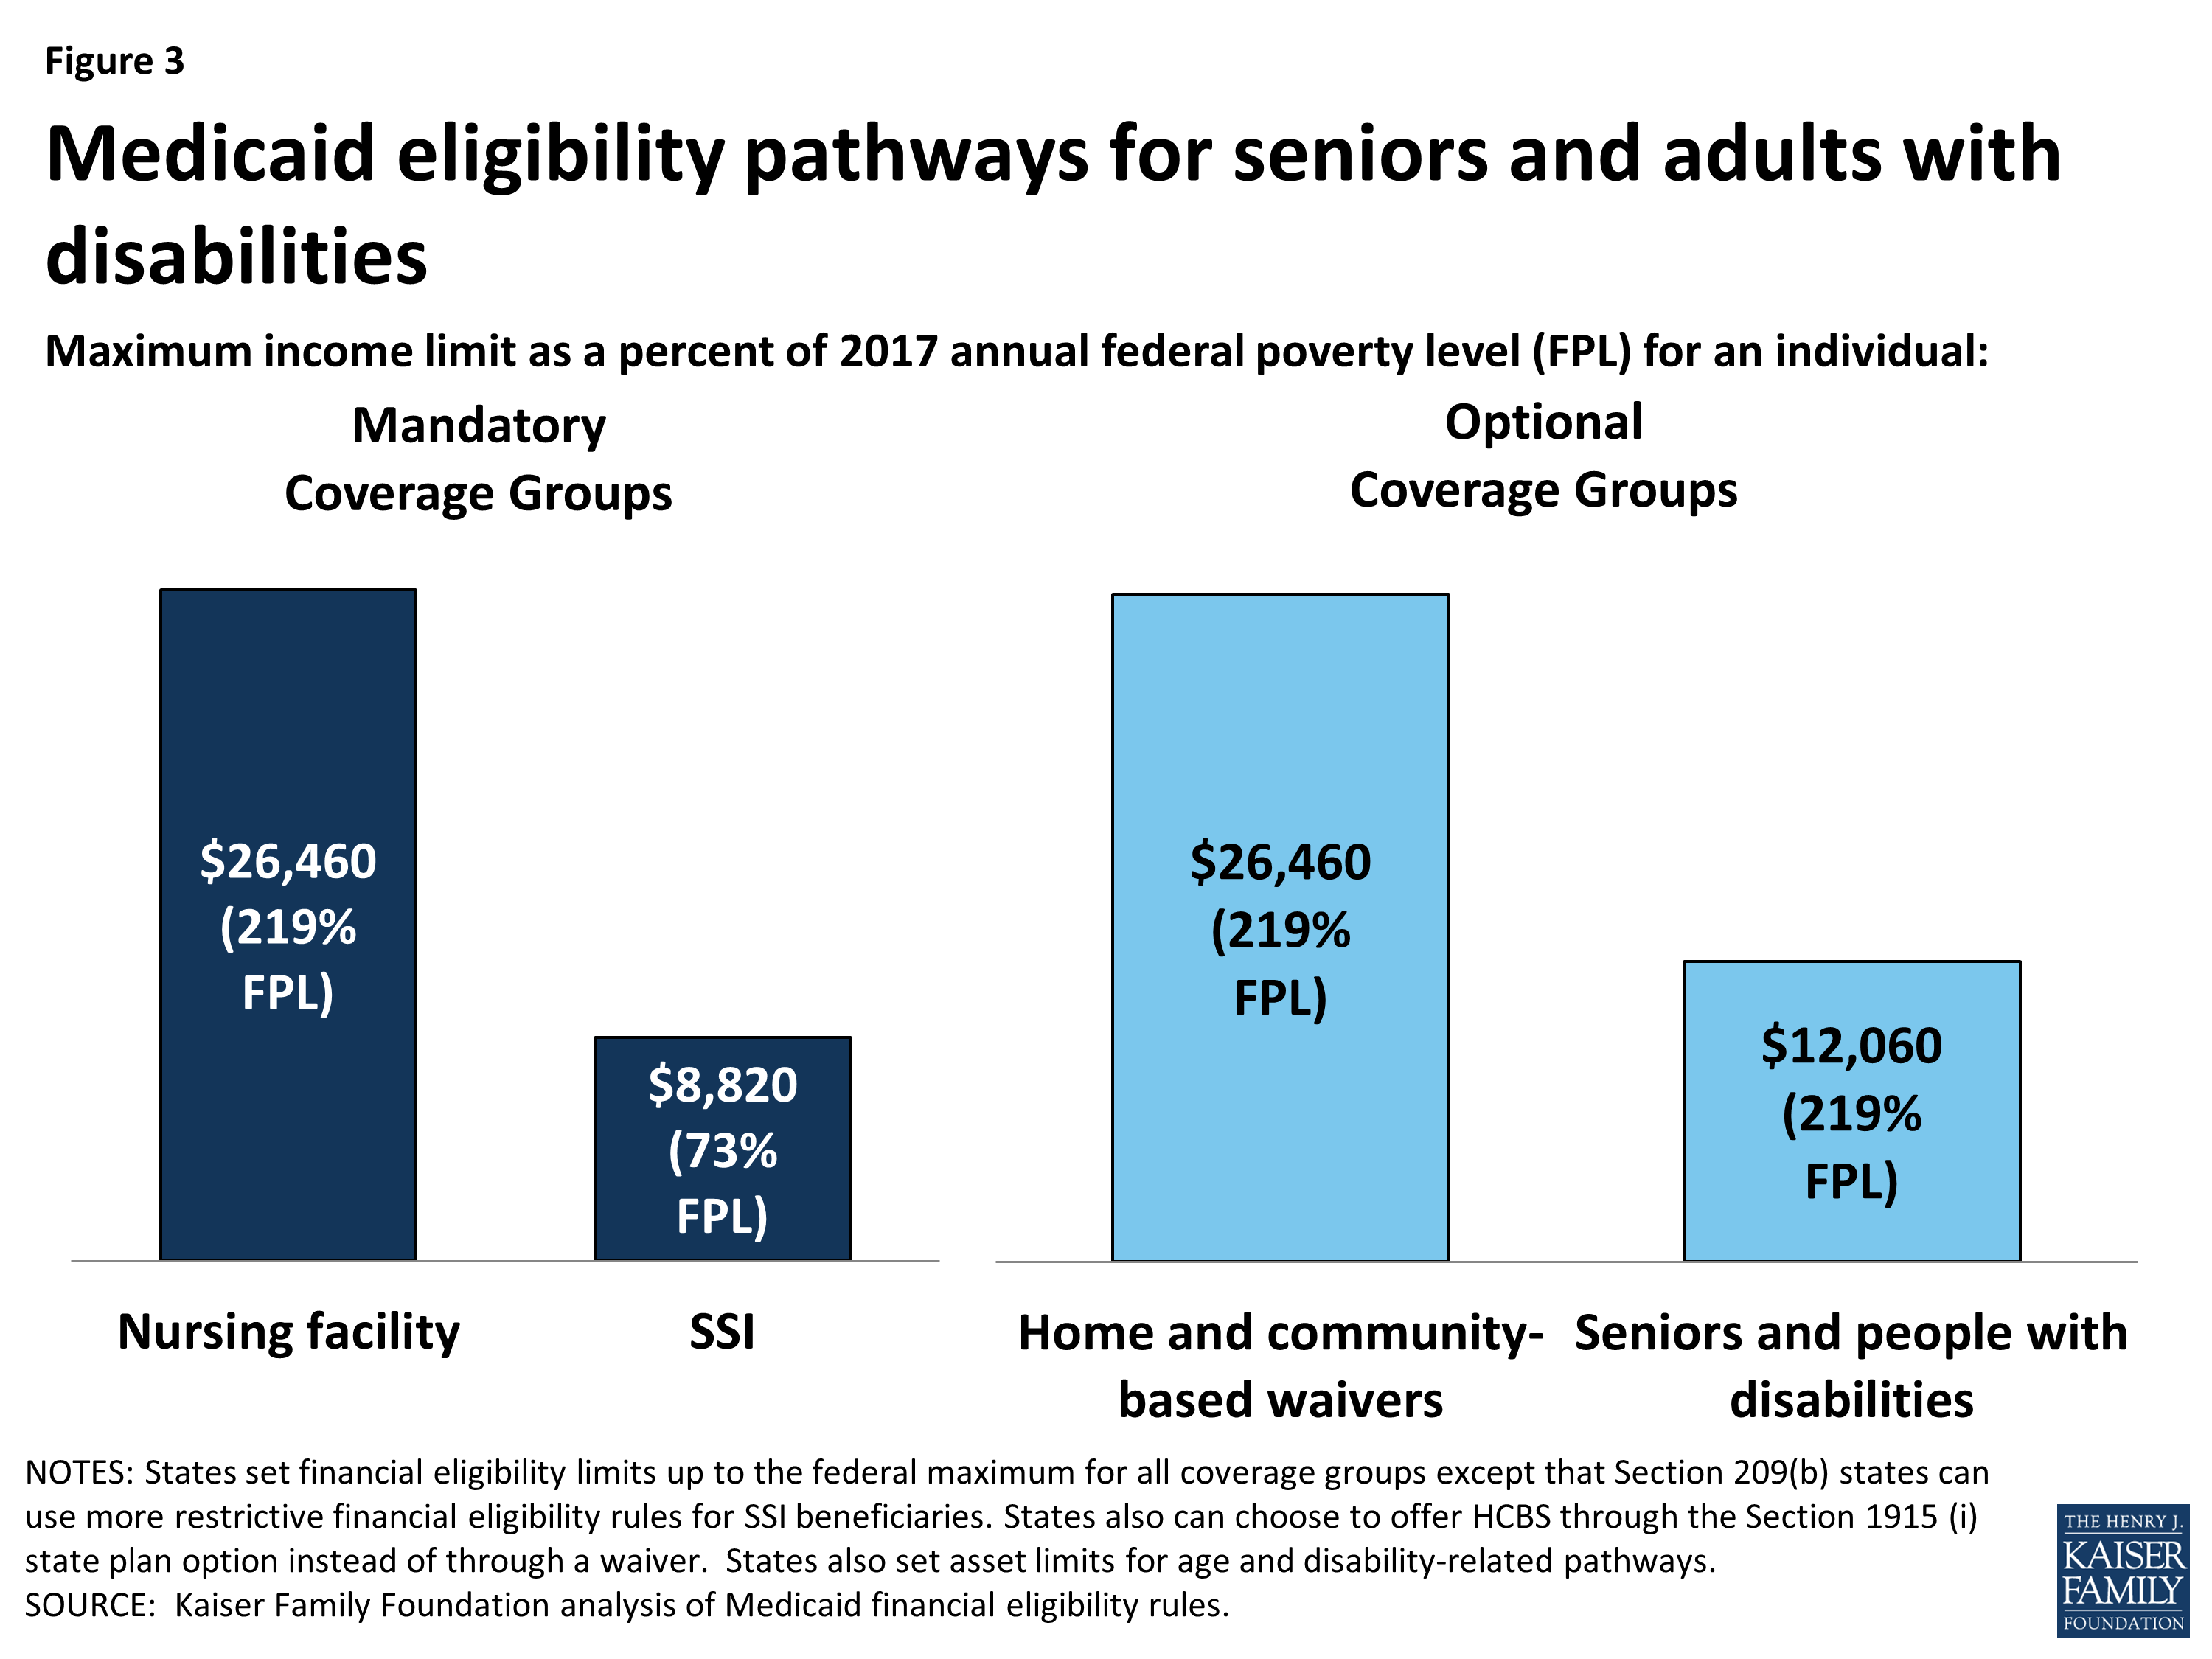 Medicaid’s Role for Medicare Beneficiaries KFF